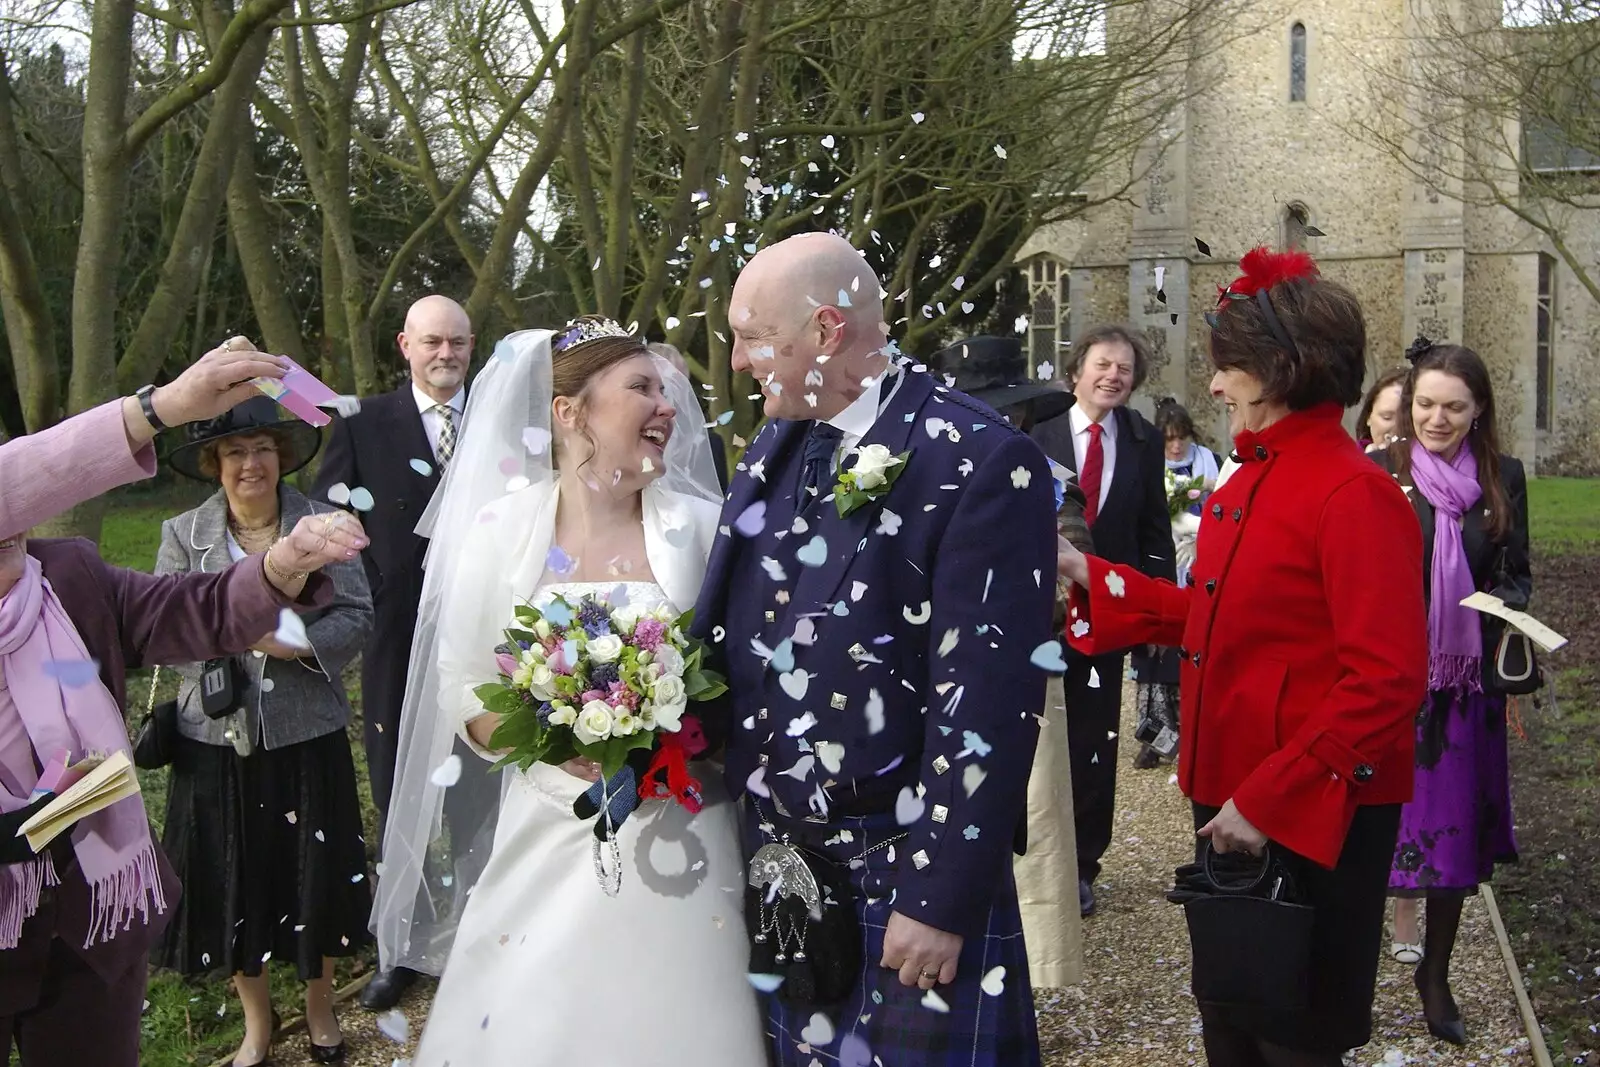 Rachel and Gov and a shower of confetti, from Gov and Rachel's Wedding, Thorndon, Suffolk - 2nd February 2008